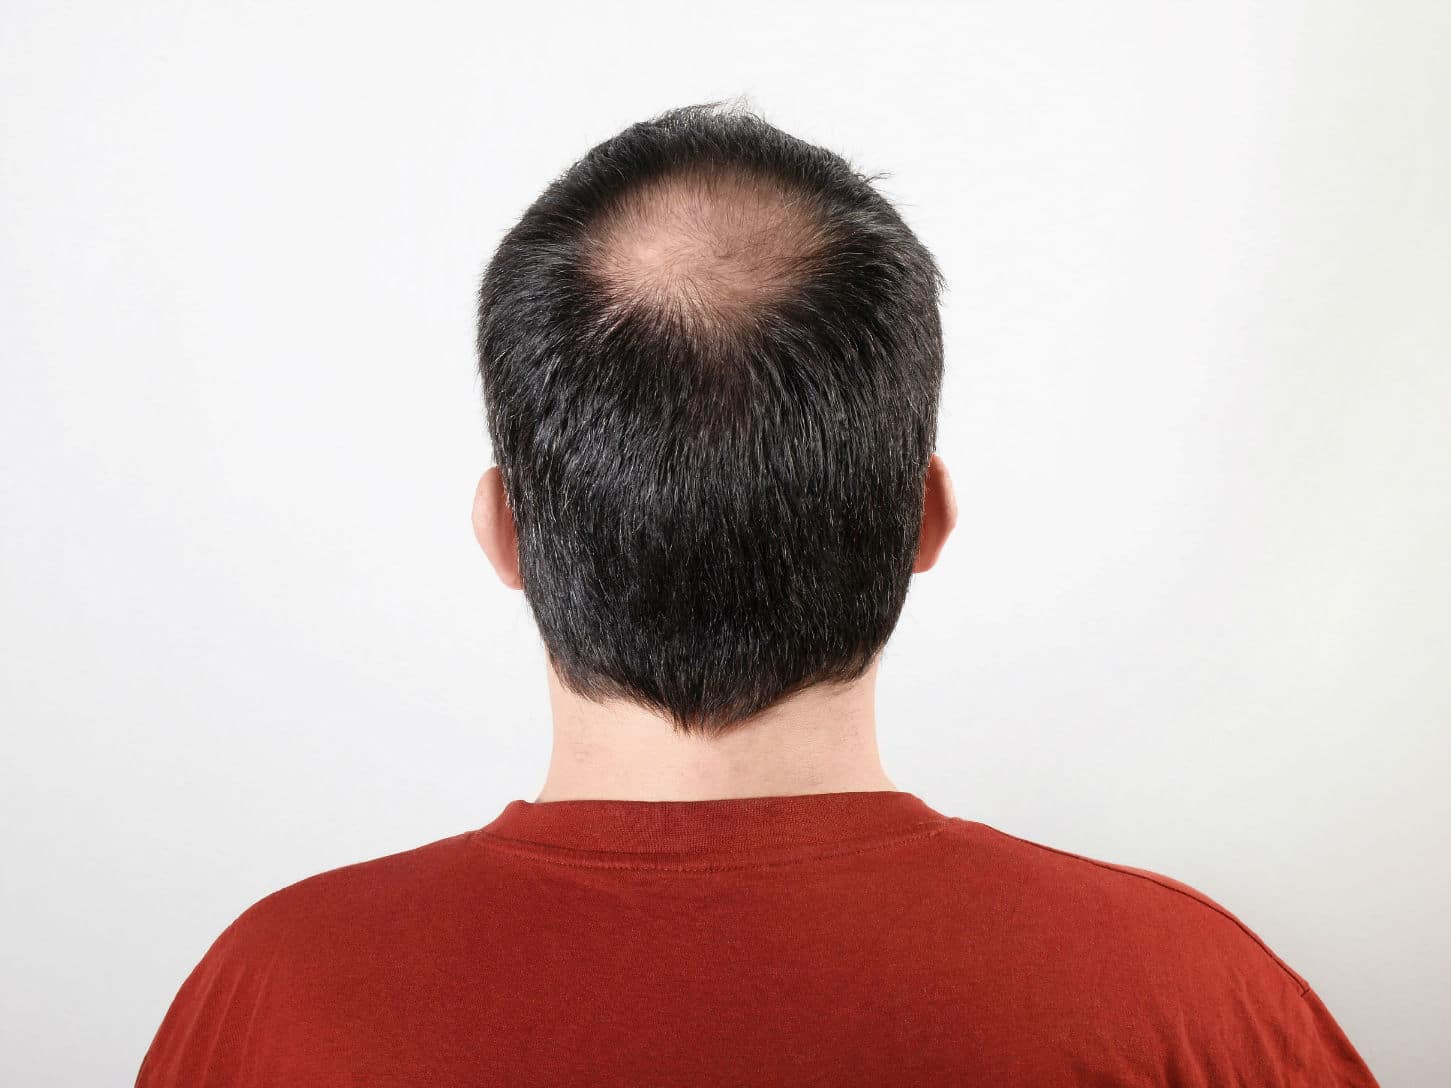 Hair Loss on Mans Head Indicating the Hair Loss Pattern Stock Image   Image of scalp crown 210798153